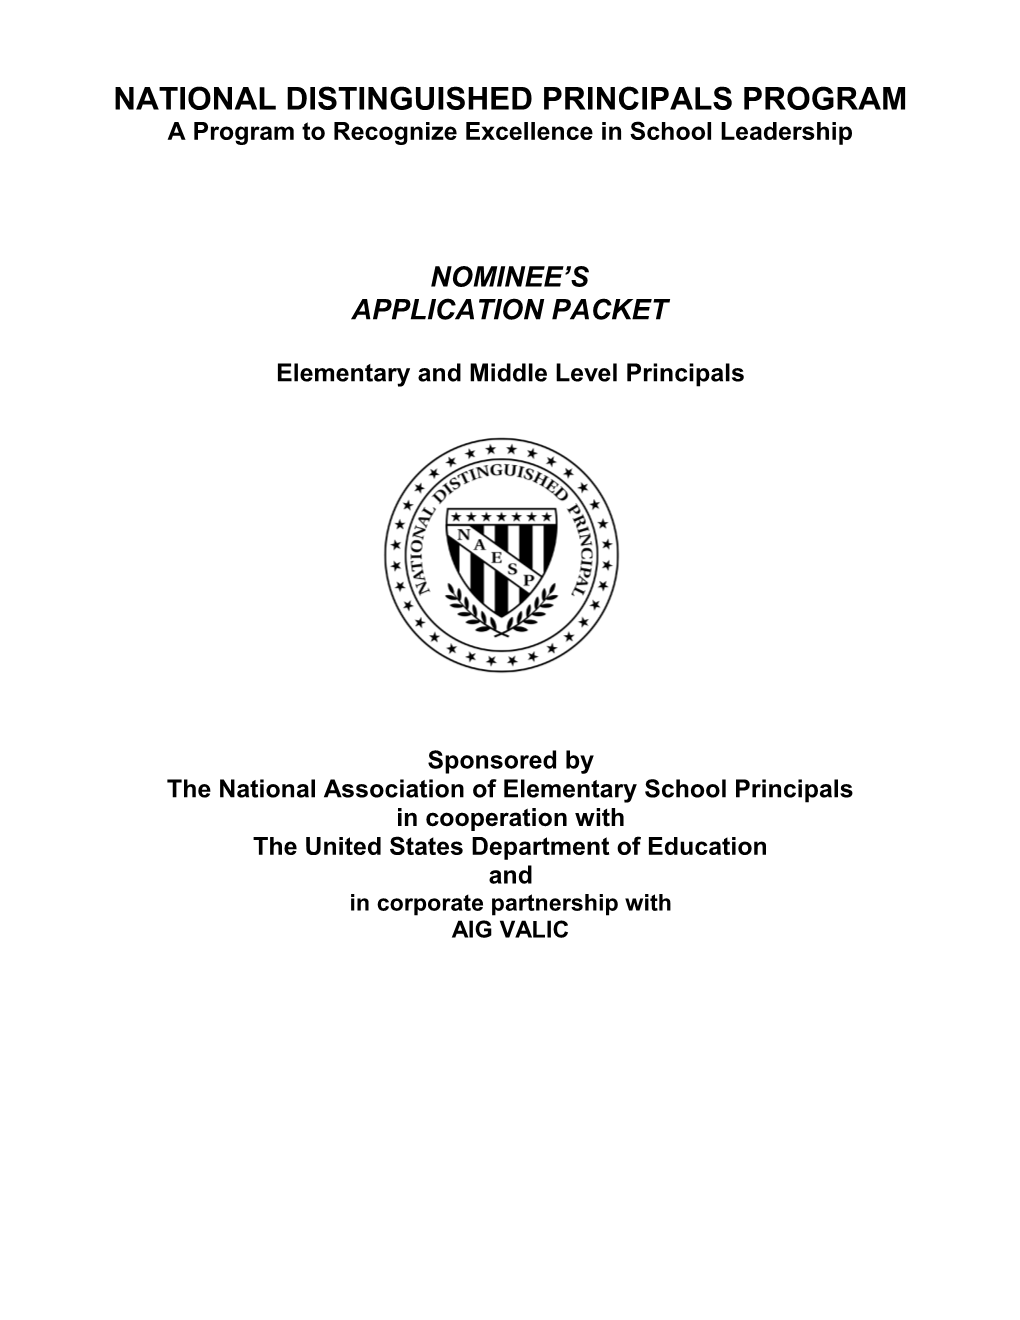 Nominee's Application Packet